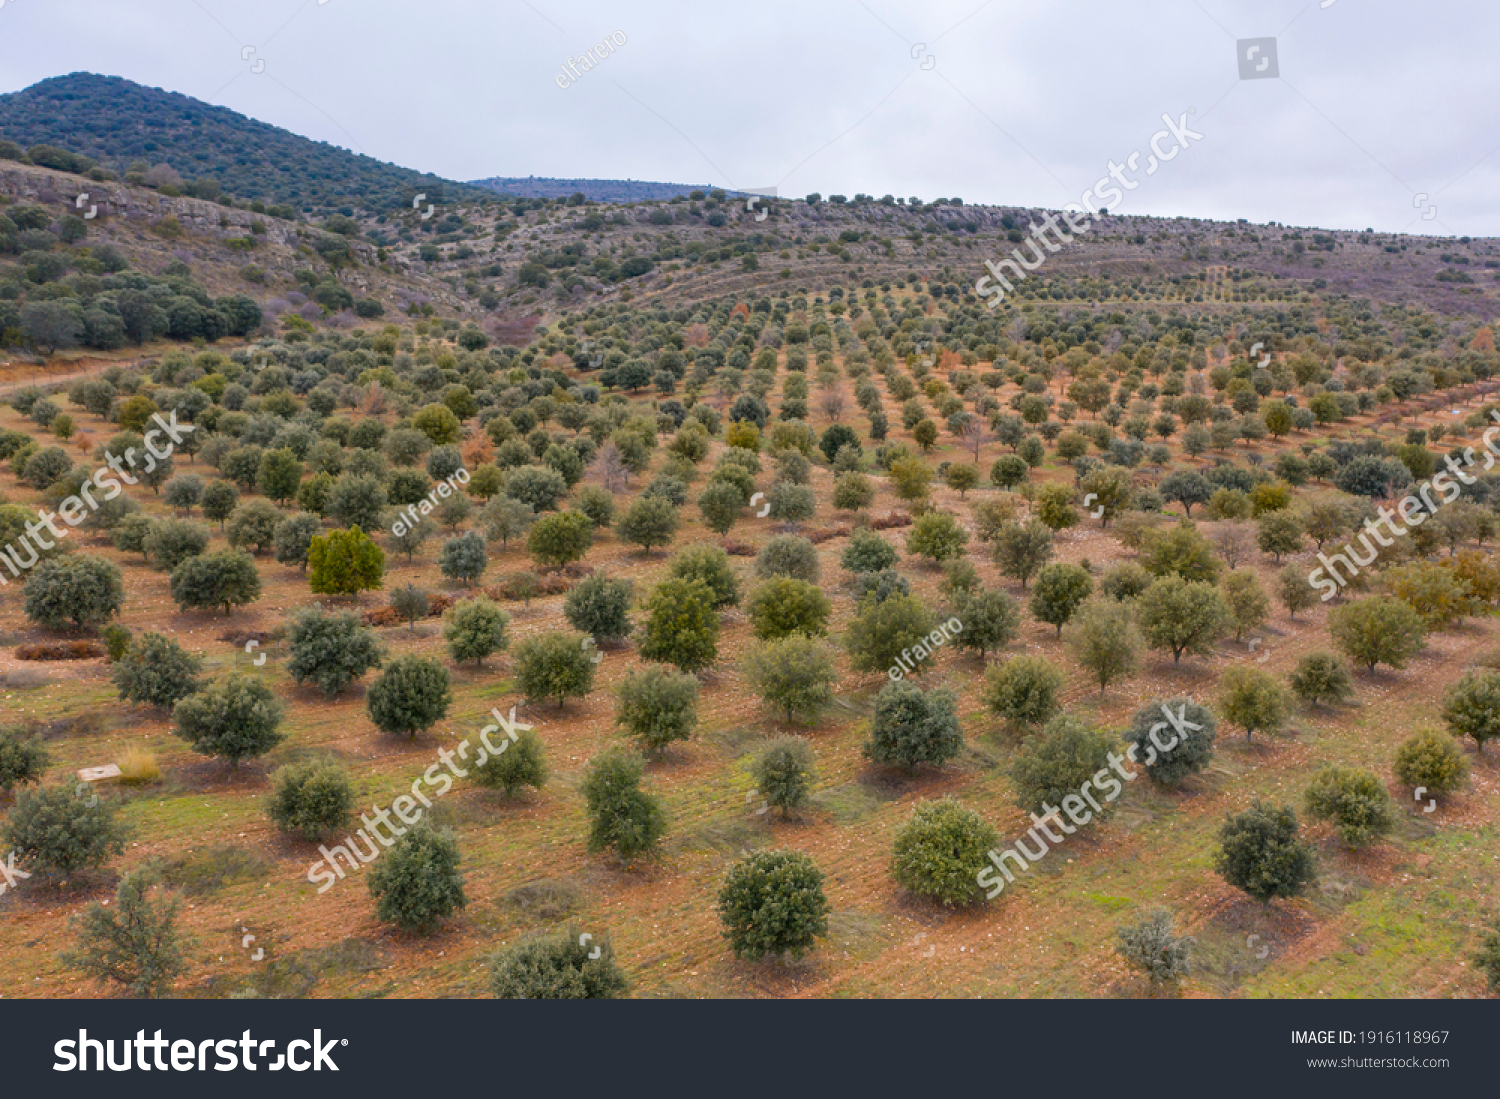 aerial view of holm oak forest where there are truffles in Soria Spain #1916118967